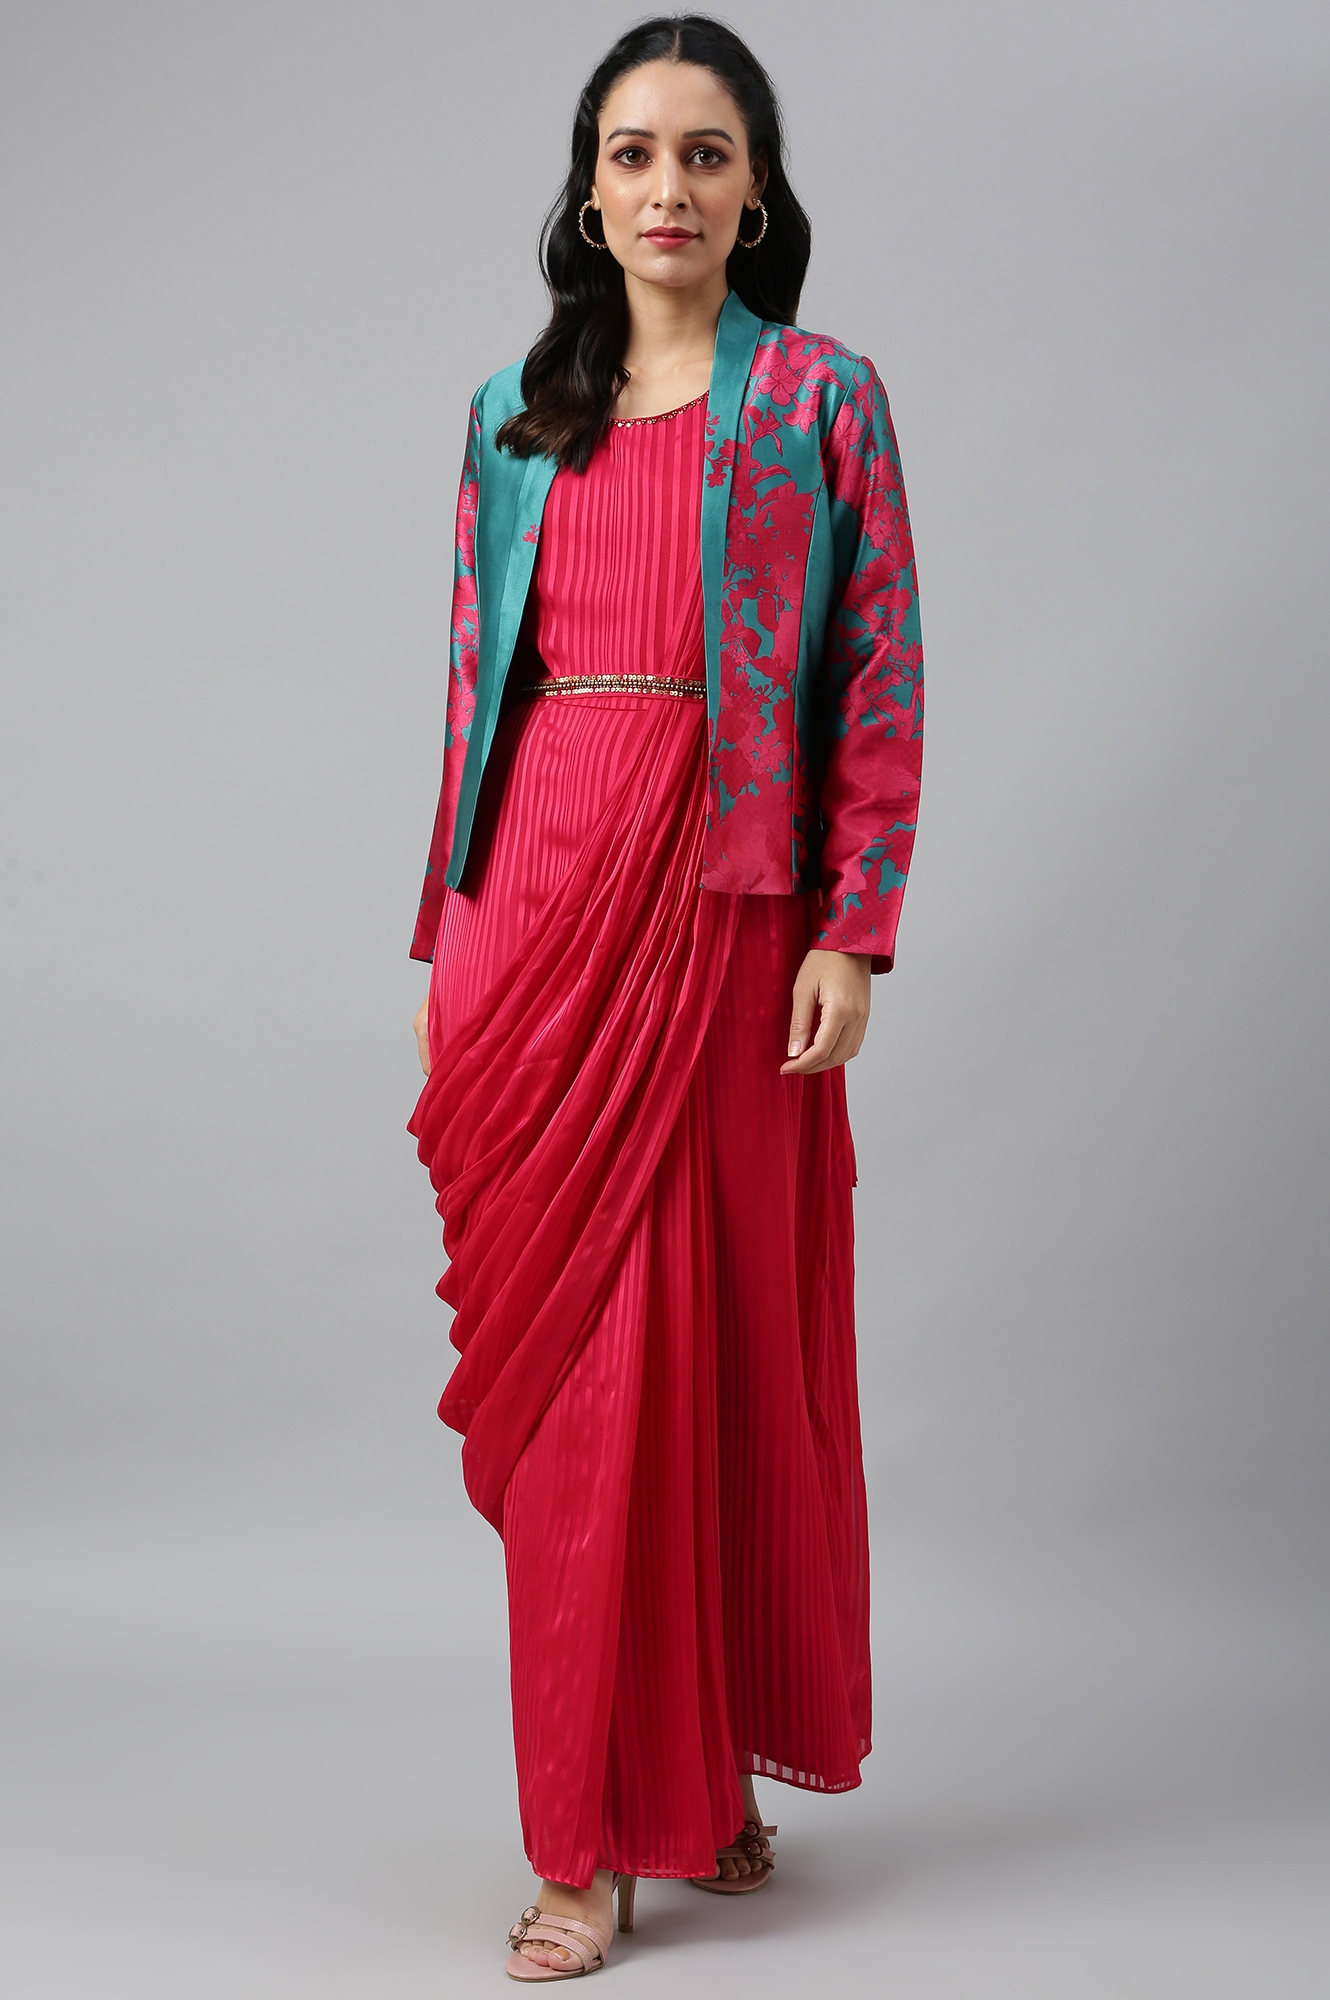 W | Wishful by W Coral Red Sleeveless Predrape Saree Dress with Belt and Tailored Jacket Set